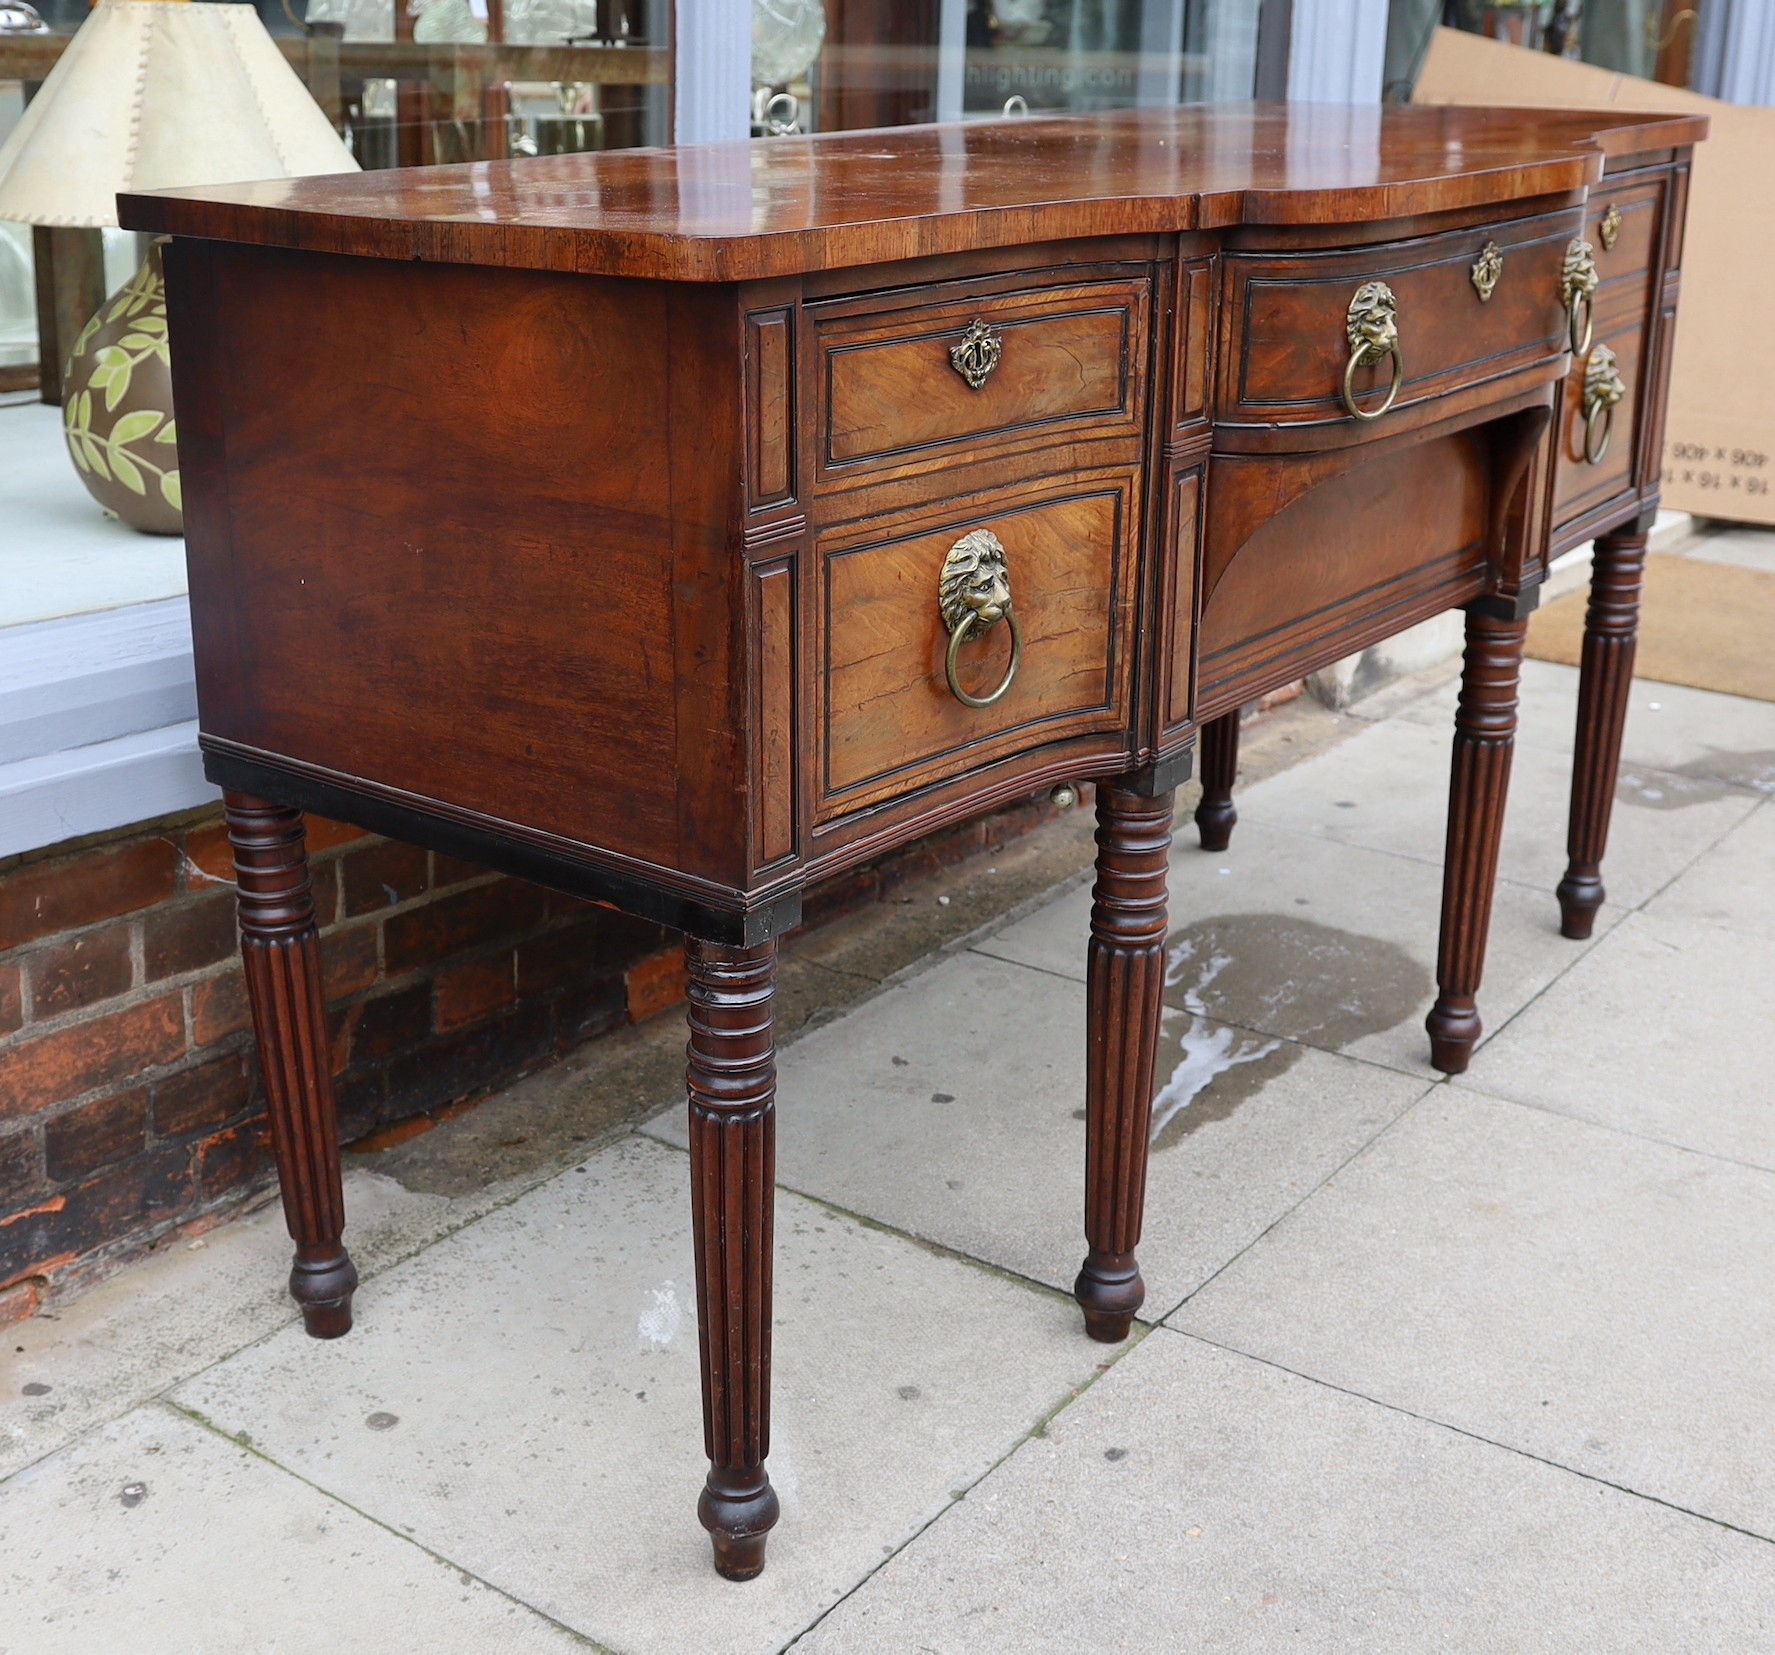 A Regency ebony strung mahogany breakfront sideboard, each deep drawer with ‘secret’ revolving cellaret compartment, centred with two long drawers, on ring turned fluted and tapered legs, width 167cm. depth 69cm. height